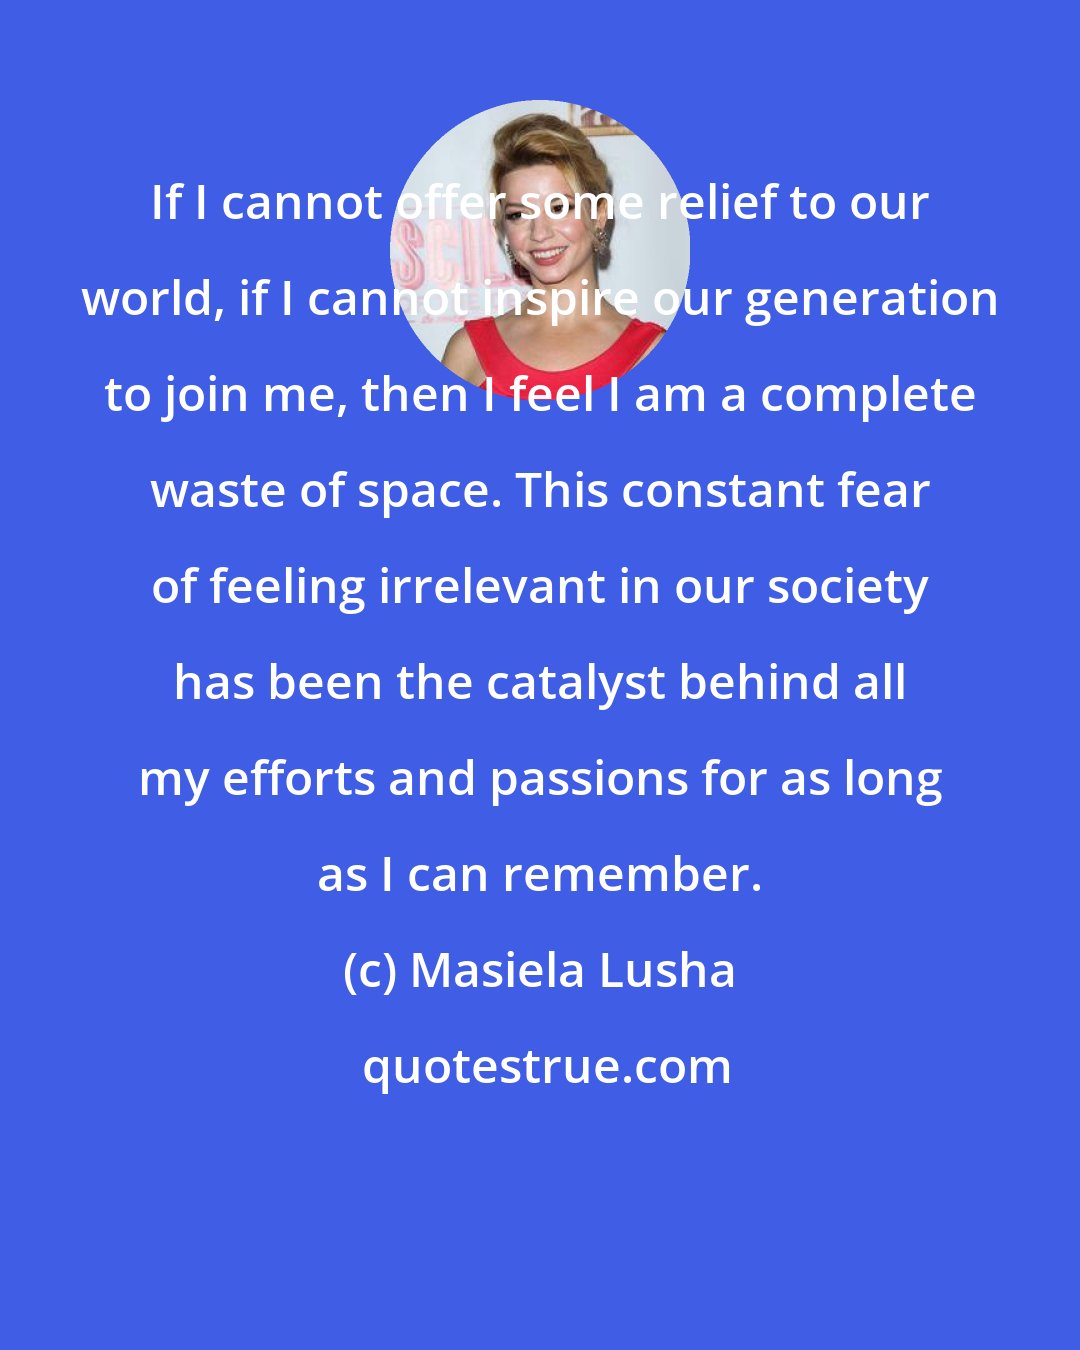 Masiela Lusha: If I cannot offer some relief to our world, if I cannot inspire our generation to join me, then I feel I am a complete waste of space. This constant fear of feeling irrelevant in our society has been the catalyst behind all my efforts and passions for as long as I can remember.